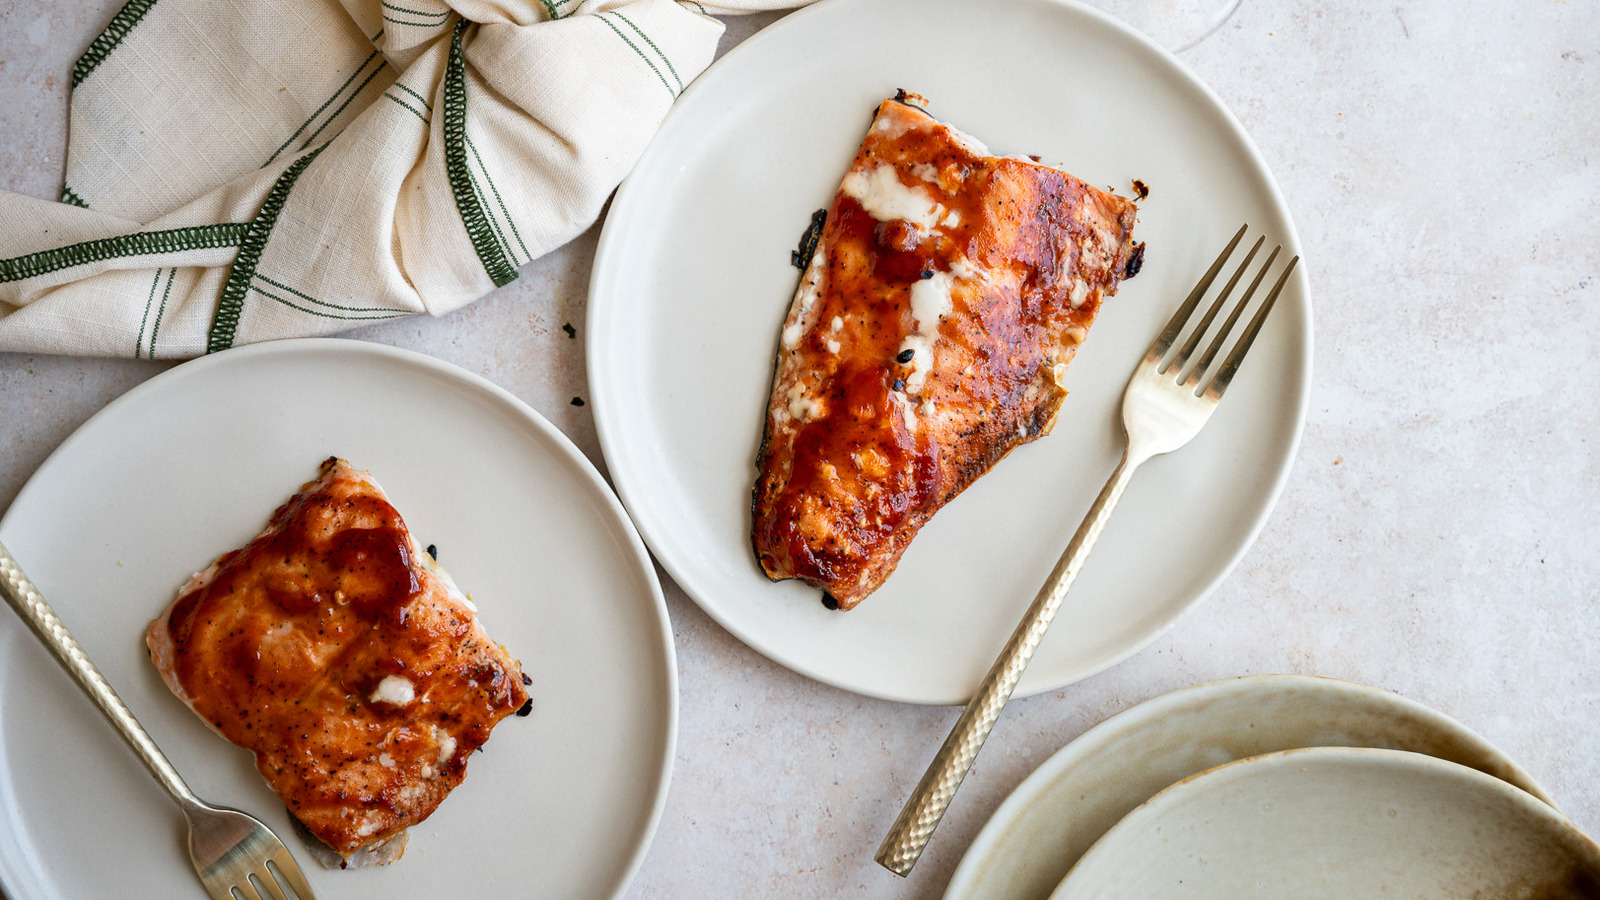 Barbecue Baked Salmon Recipe